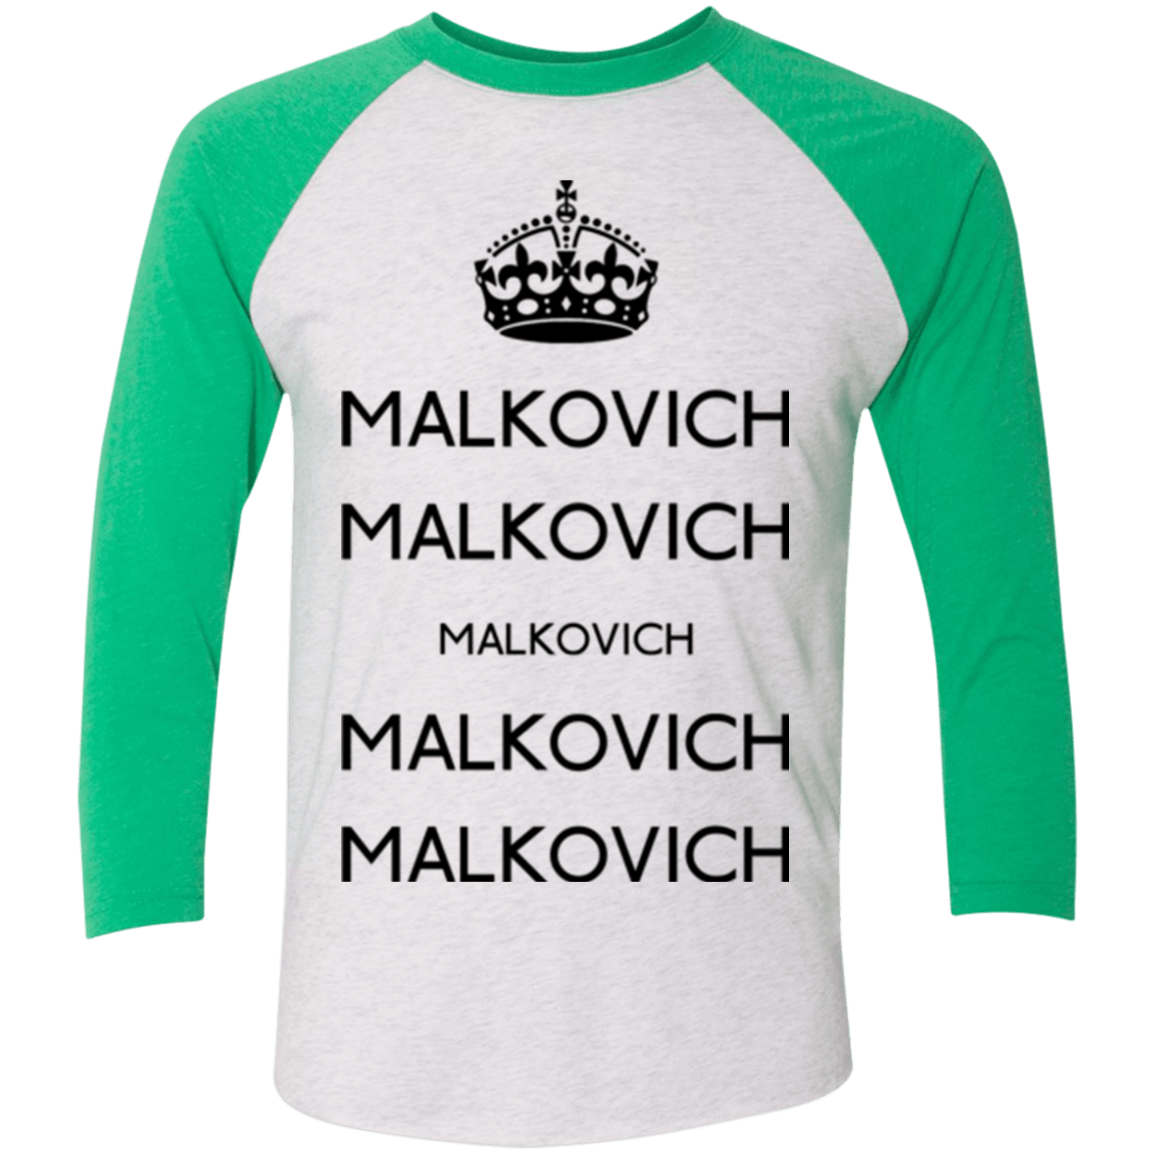 T-Shirts Heather White/Envy / X-Small Keep Calm Malkovich Men's Triblend 3/4 Sleeve